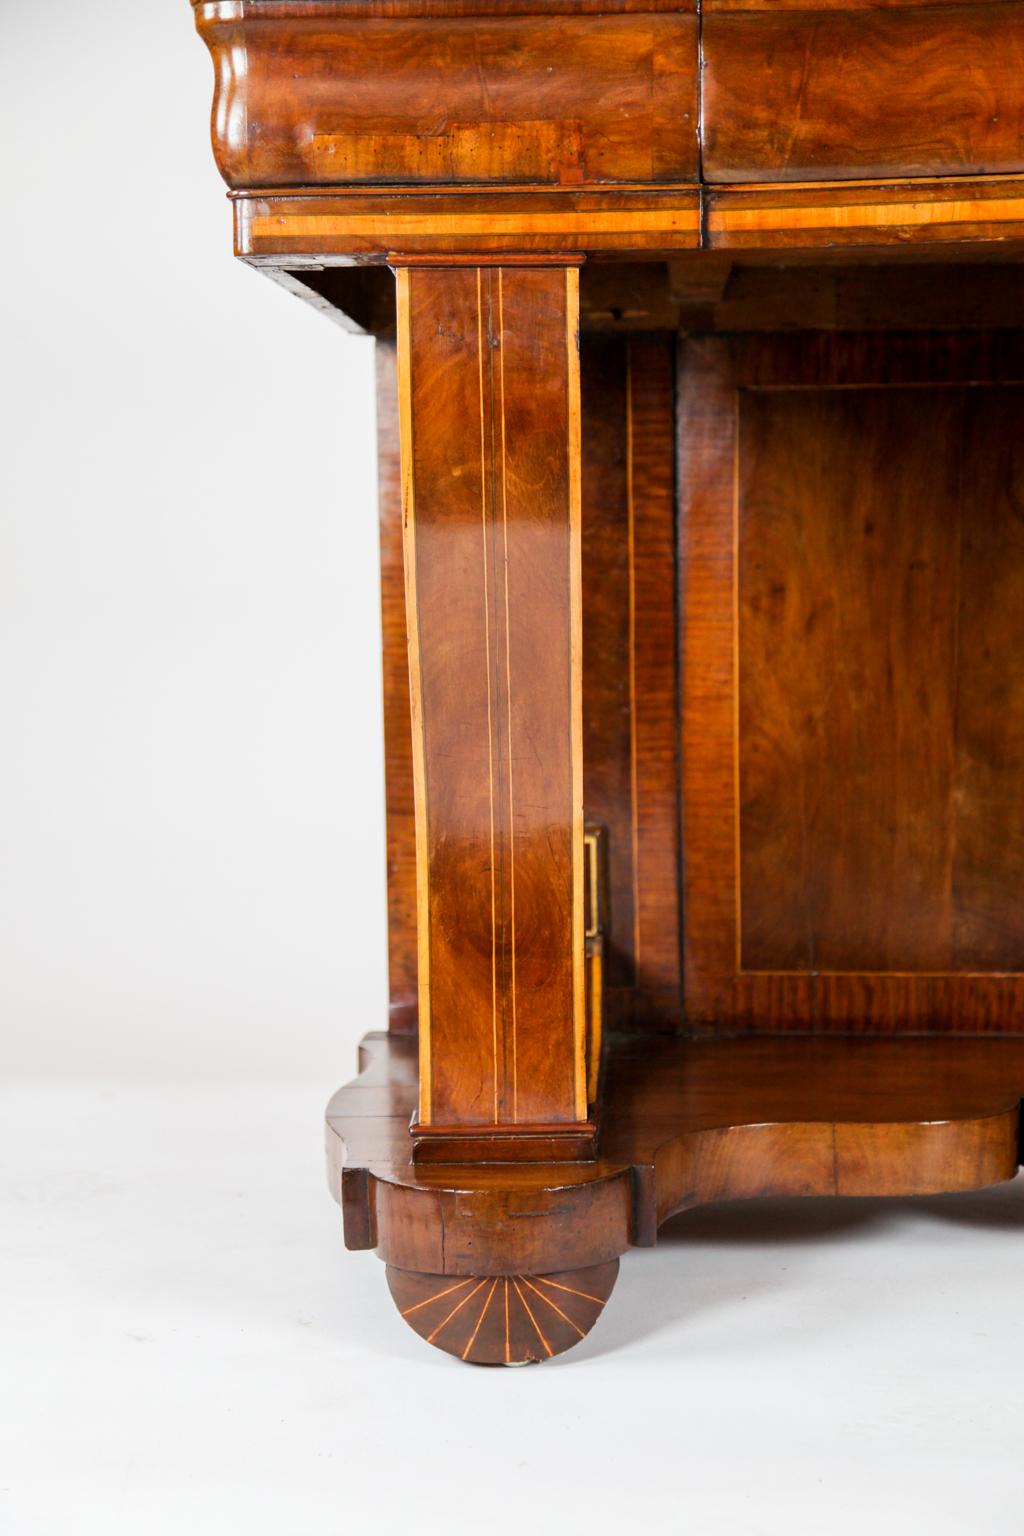 19th century inlaid Biedermeier console table, the cross banded top with inlaid quarter fans in each corner, the OG shaped frieze with central drawer above serpentine shaped inlaid legs supporting lower shaped shelf, inlaid and crossbanded back